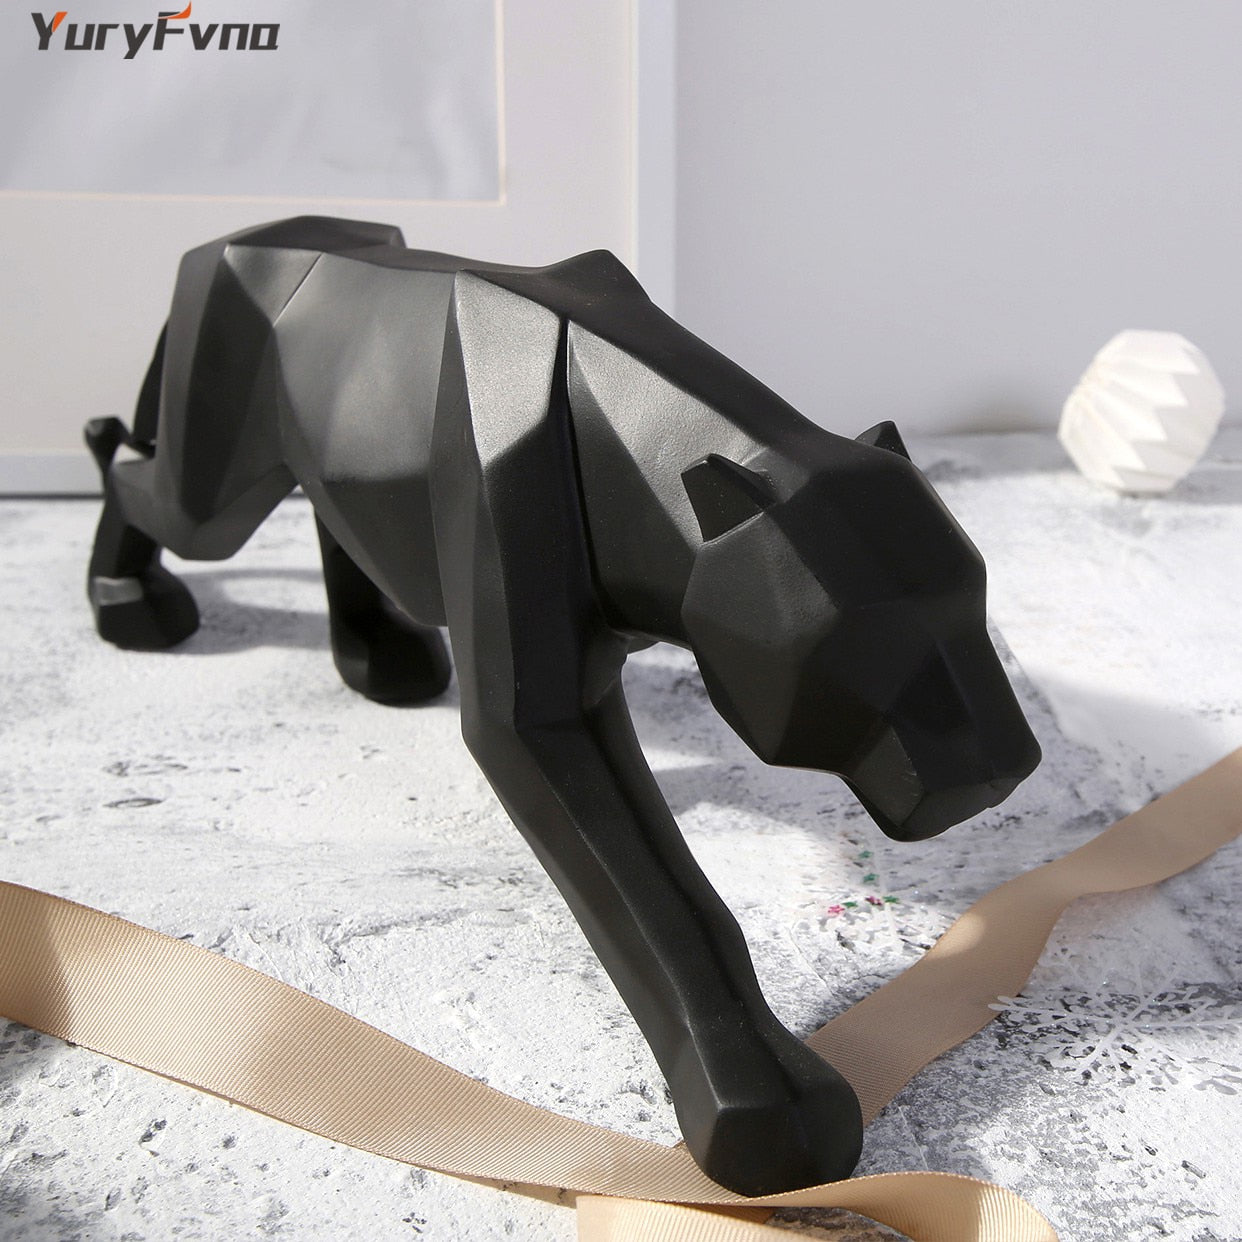 YuryFvna Abstract Resin Leopard Statue Geometric Wildlife Panther Figurine Animal Sculpture Modern Home Office Decoration Gift